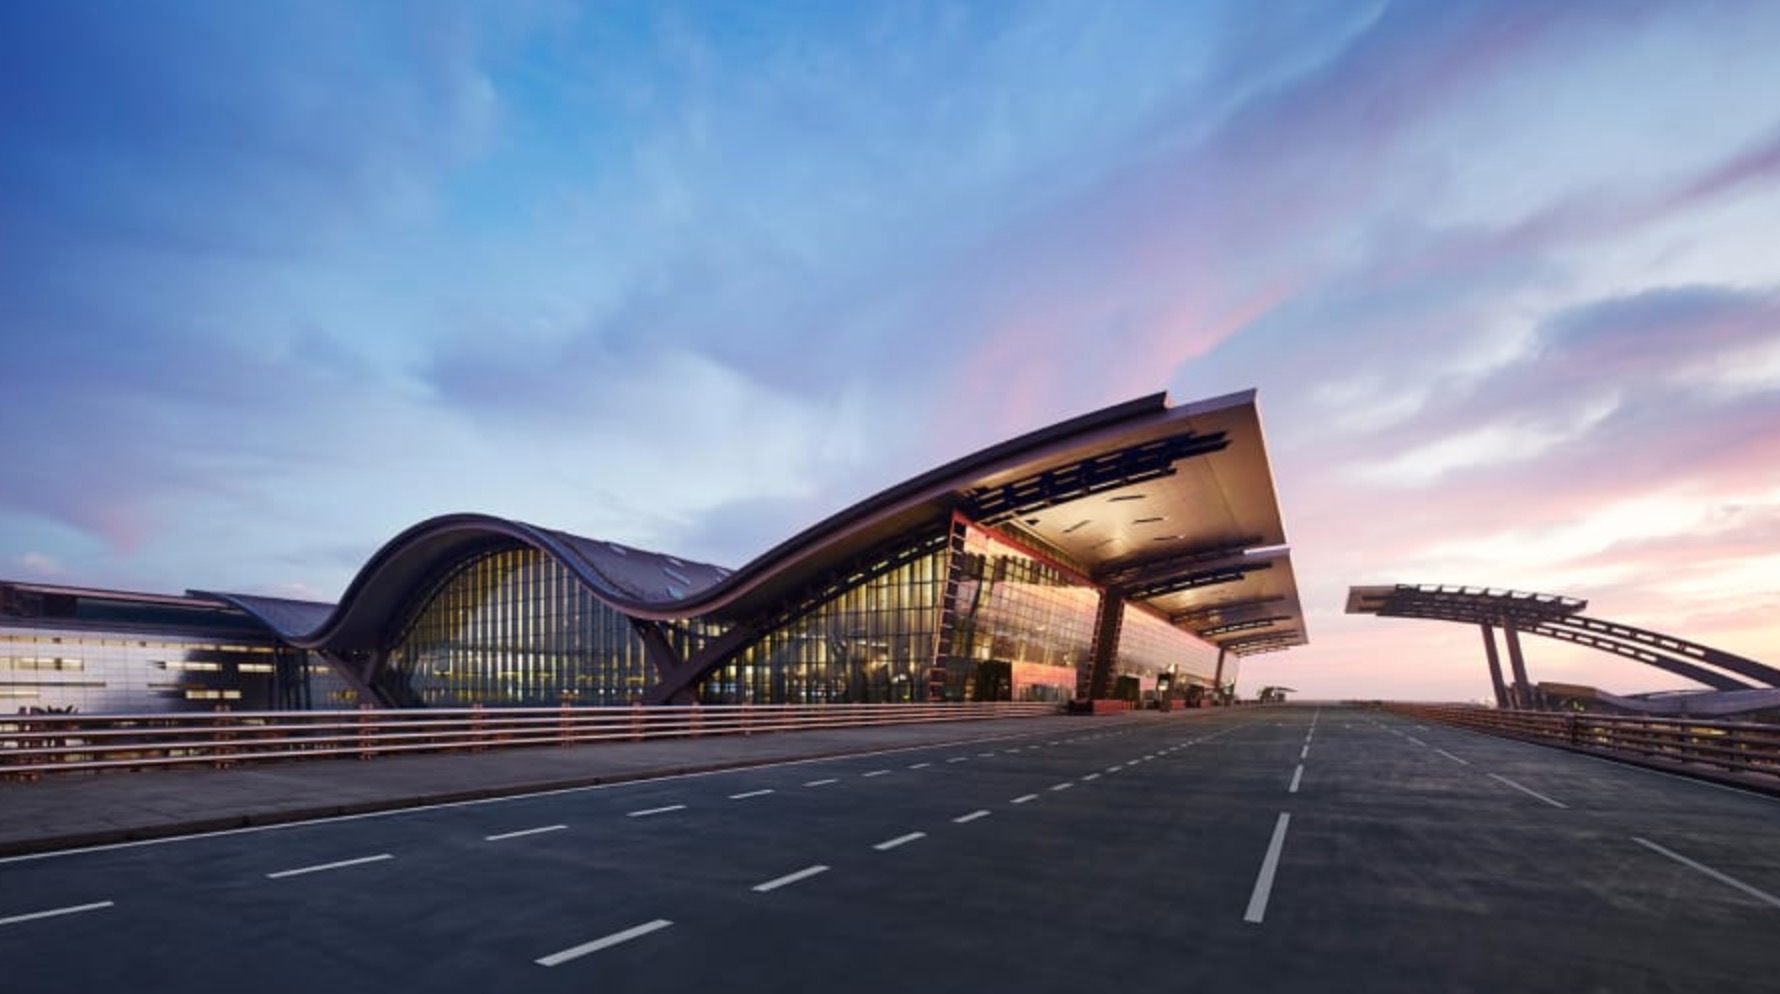 HIA candidate for ‘World’s Best Airport 2019’ at Skytrax Awards